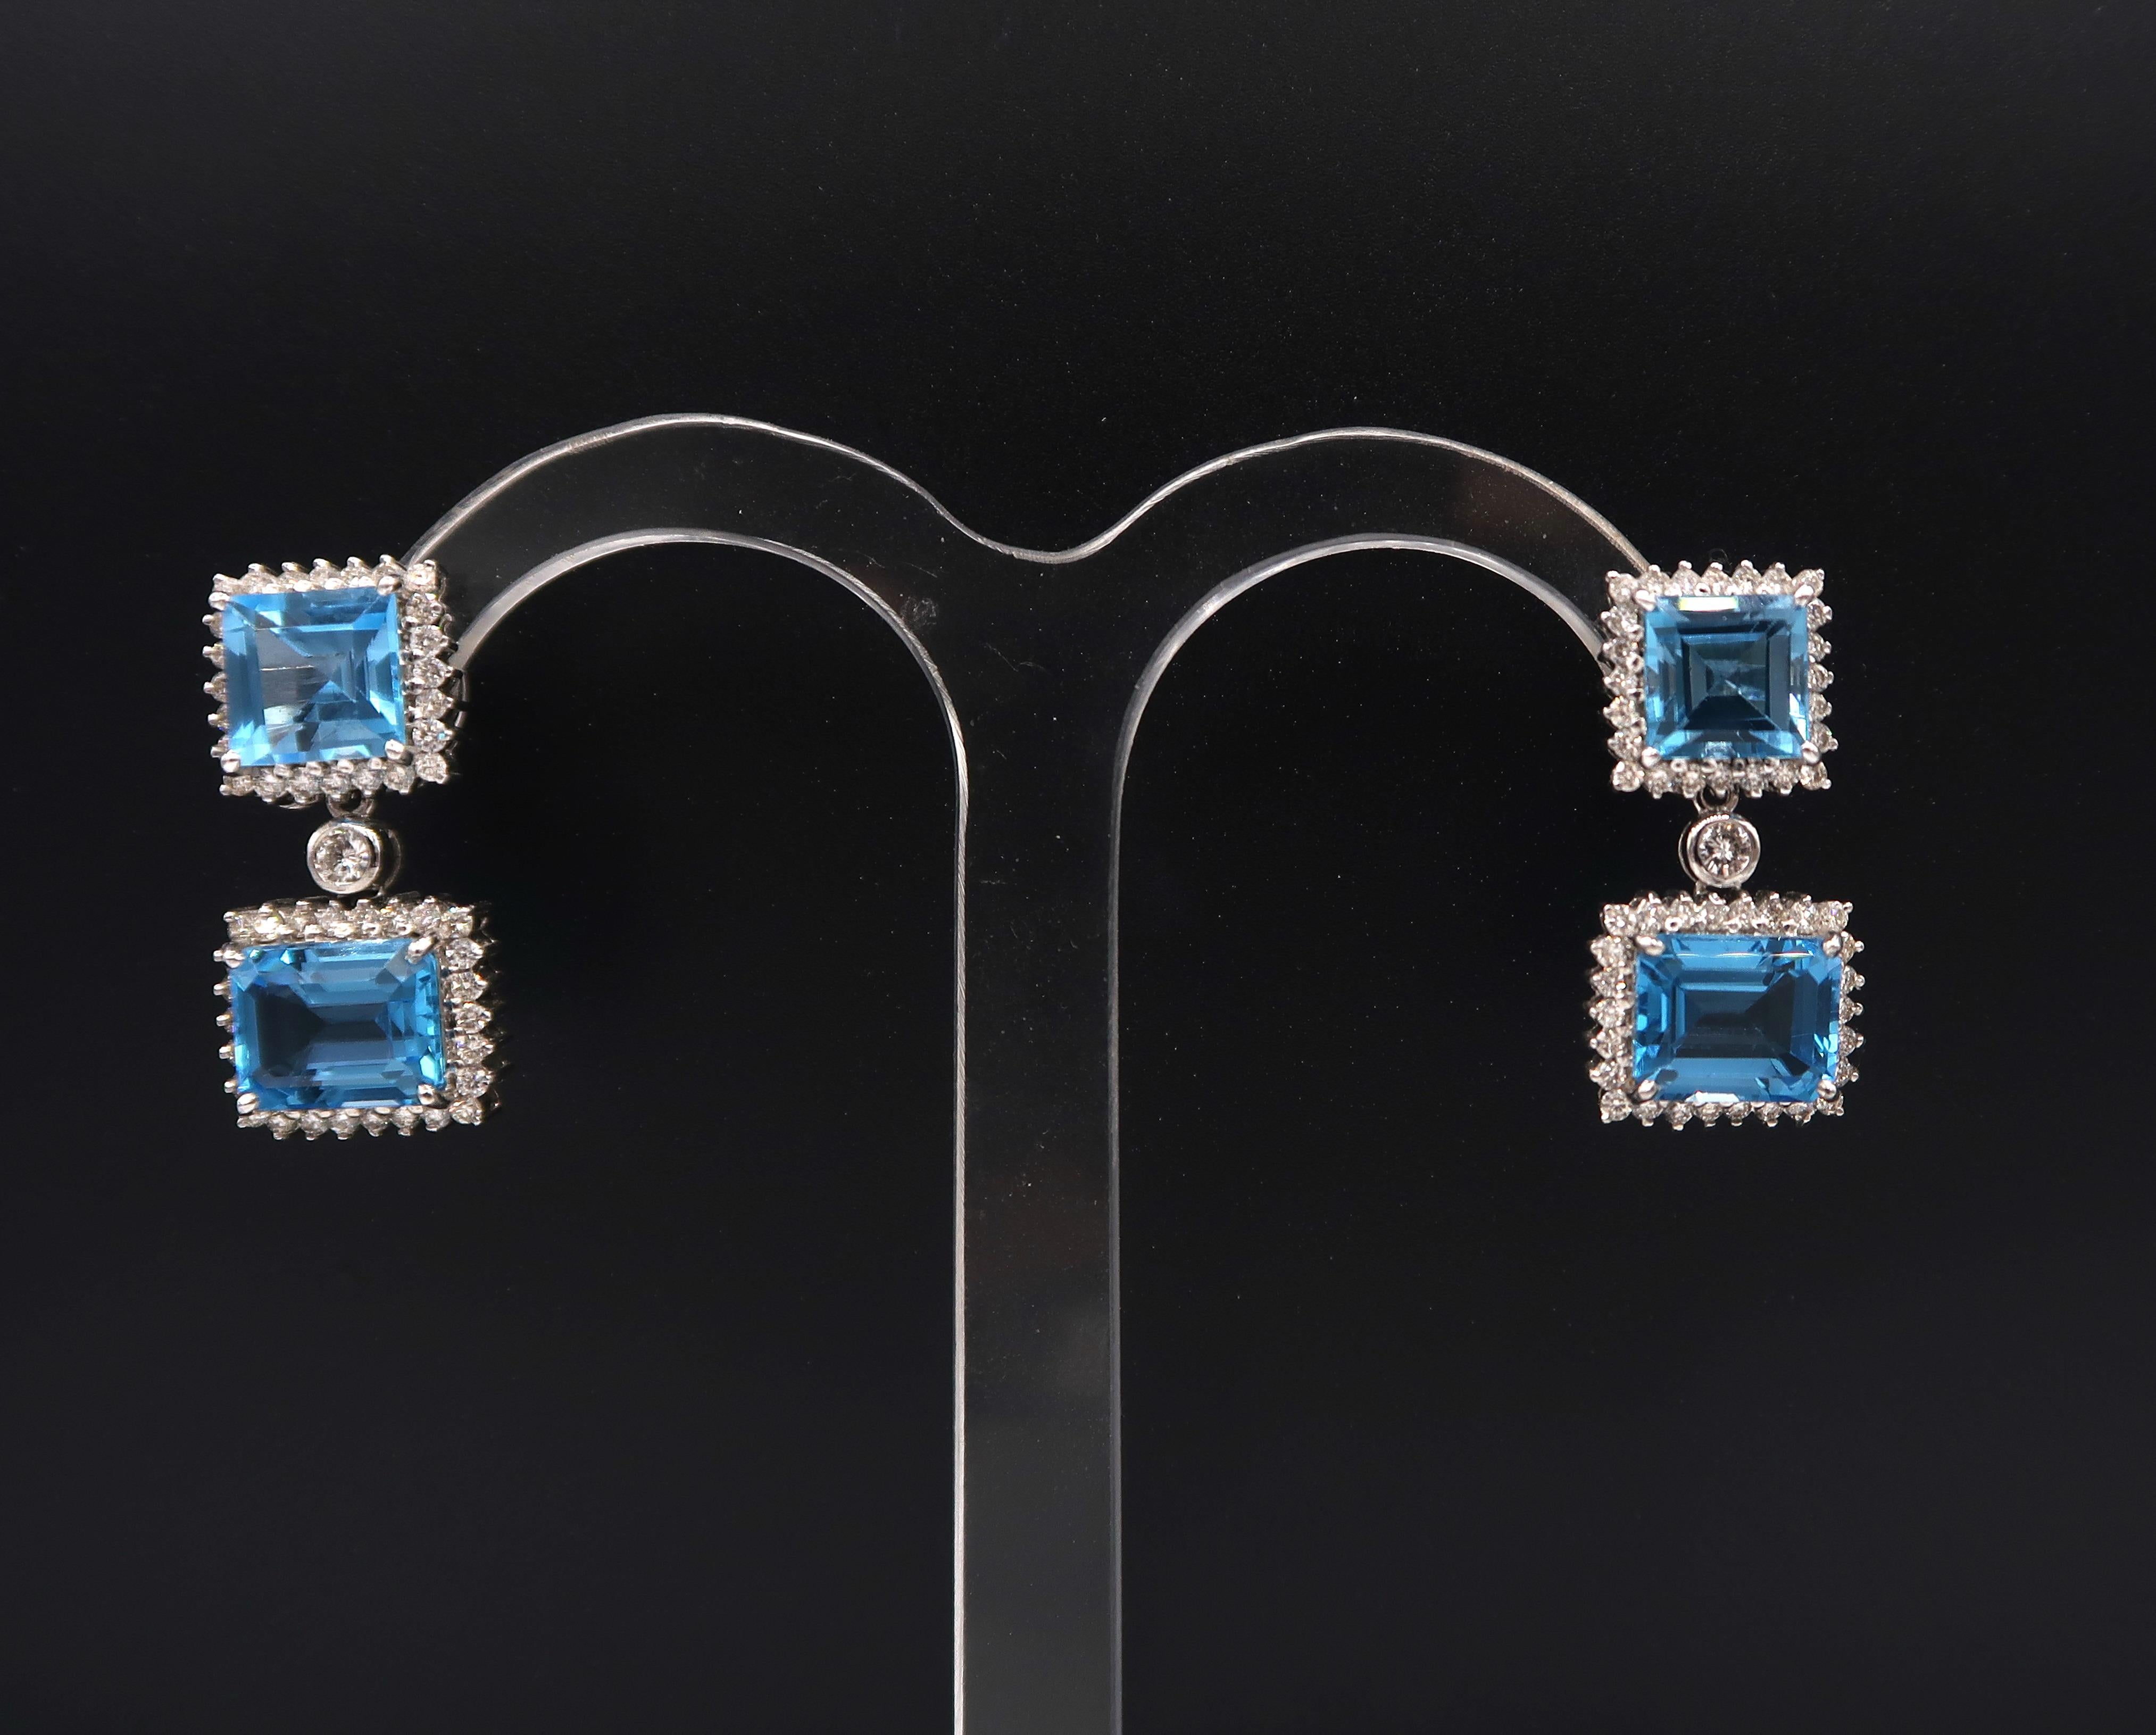 BOON Swiss Blue Topaz Square Shape Studs with Diamond and Detachable Hanging Rectangular Shape Swiss Blue Topaz embellished with Diamond

Can be worn as rectangular Topaz studs with diamonds

Stud Dimension : 1.1cm * 1.1cm
Total Length : approx.